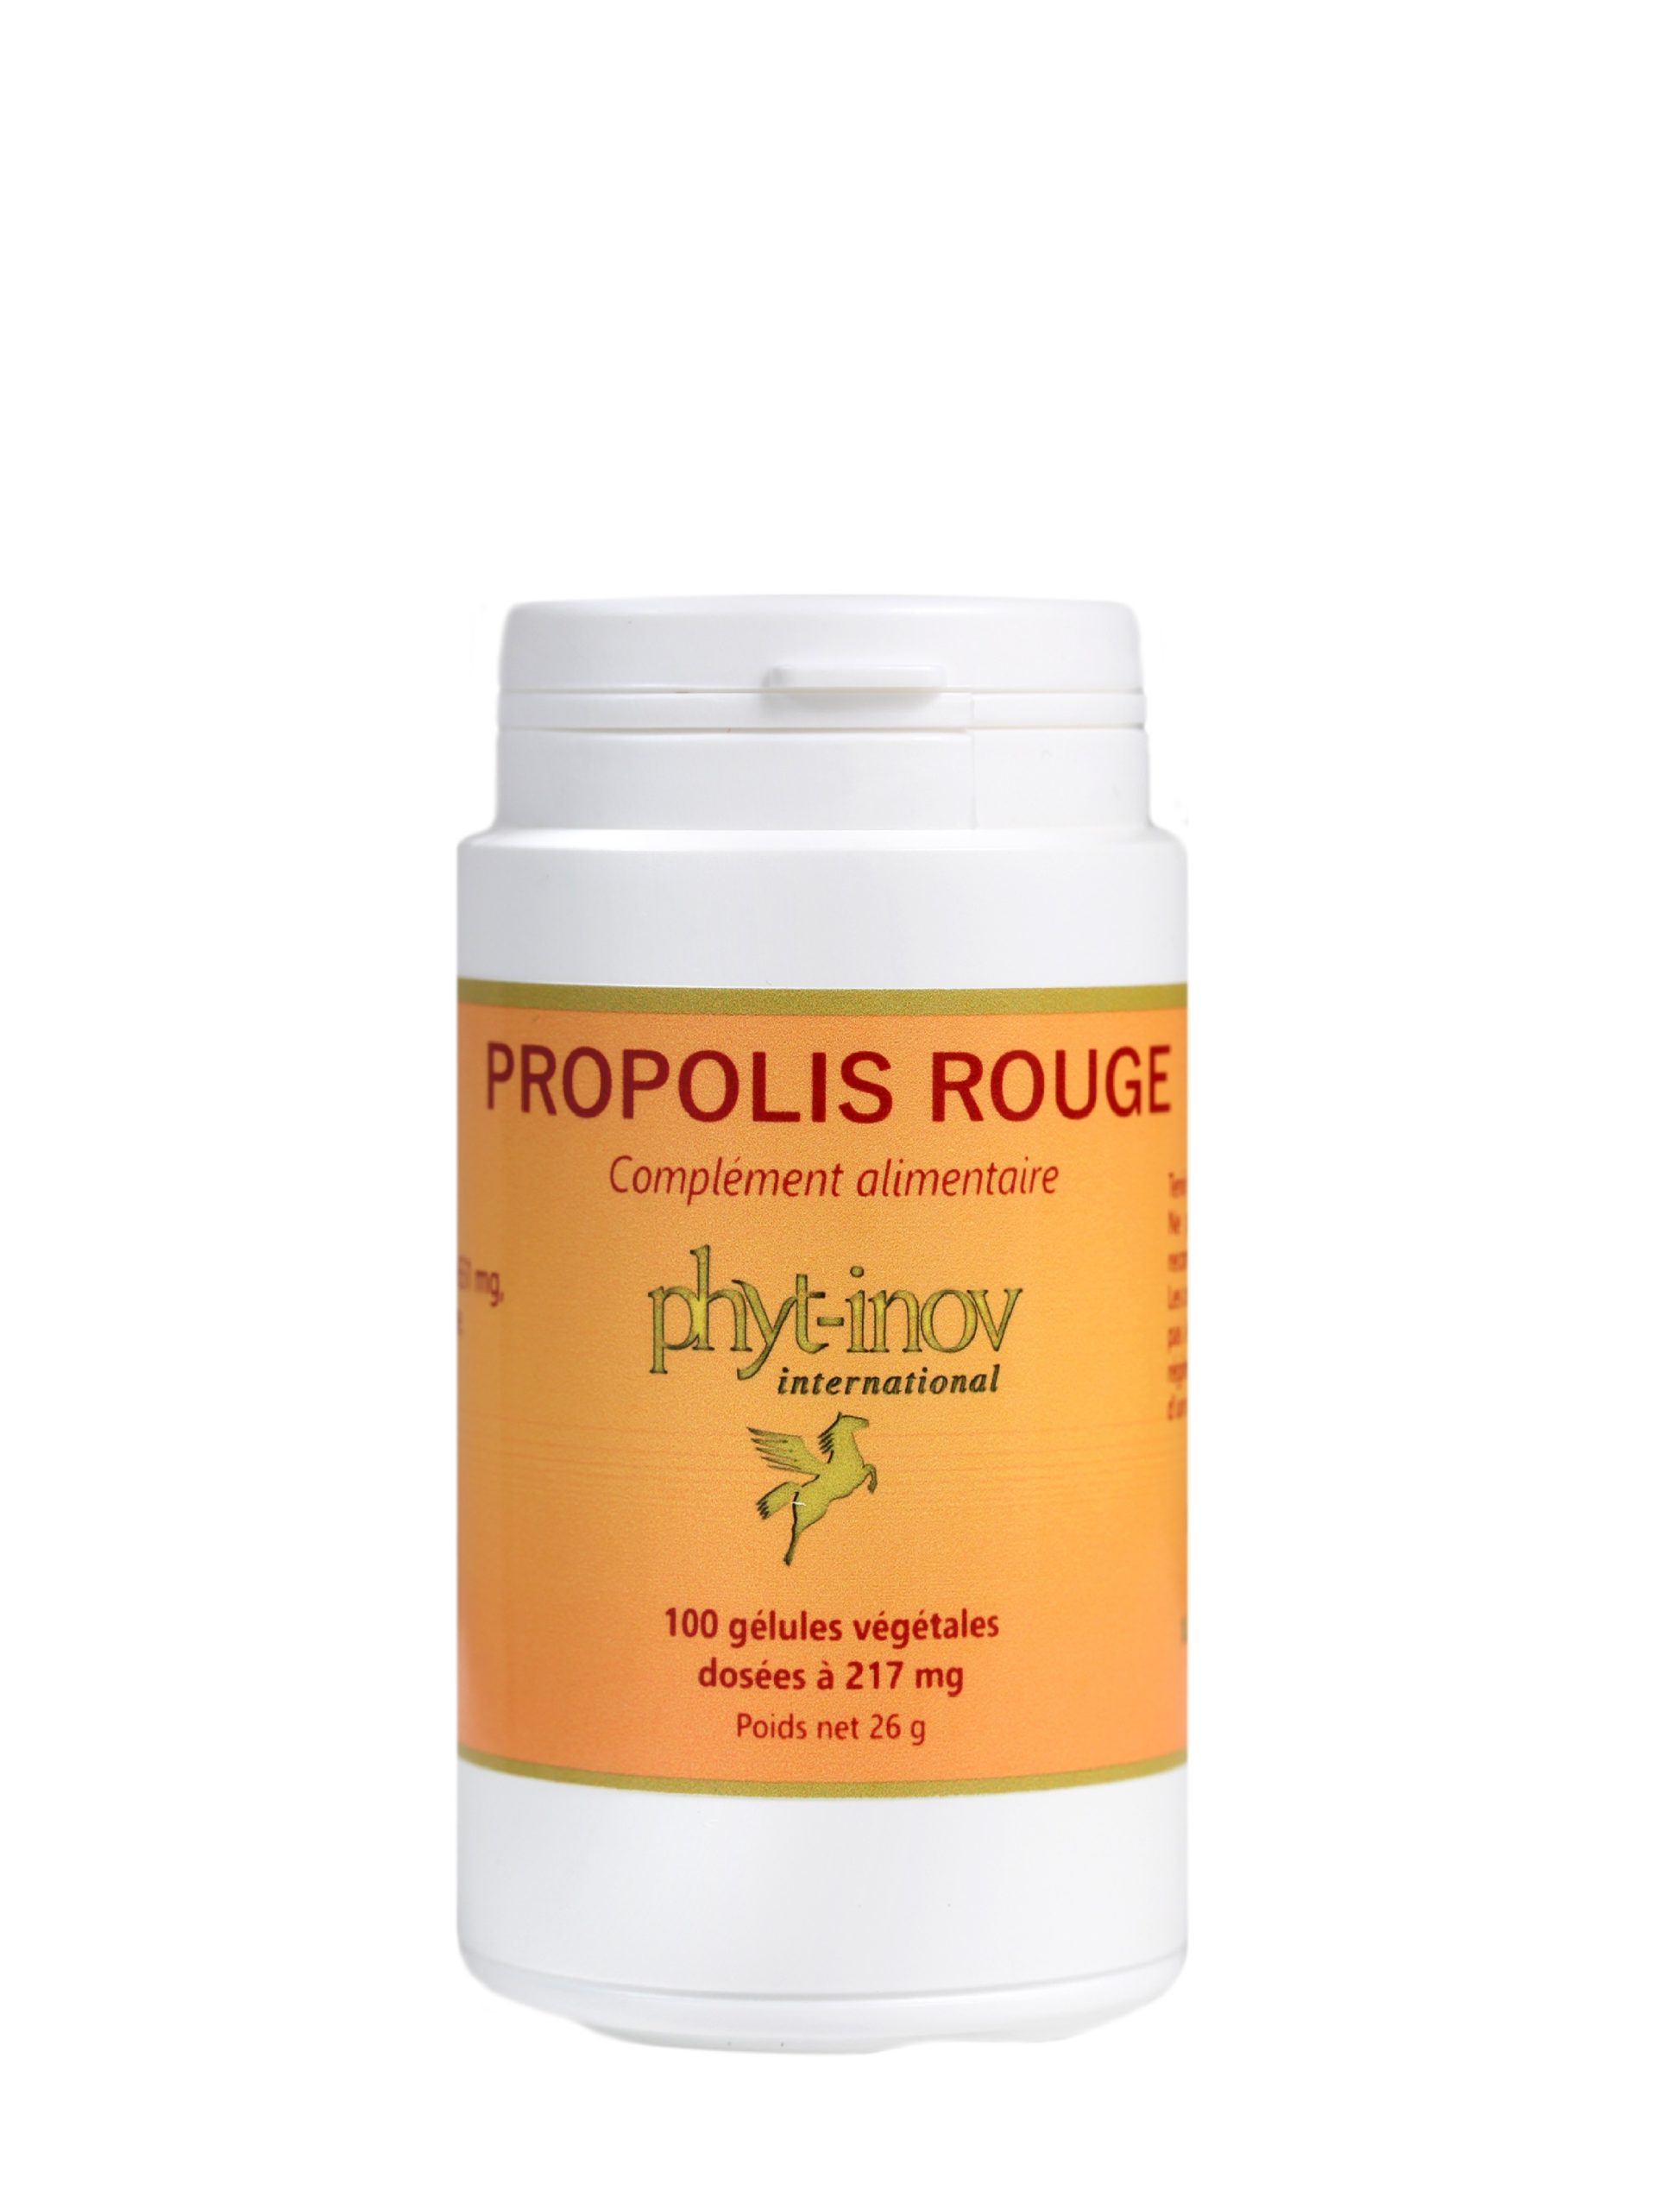 Pure Red Propolis purified by Phyt-Inov® official - Dietary supplement for  immune system support - 100 capsules containing 235 mg